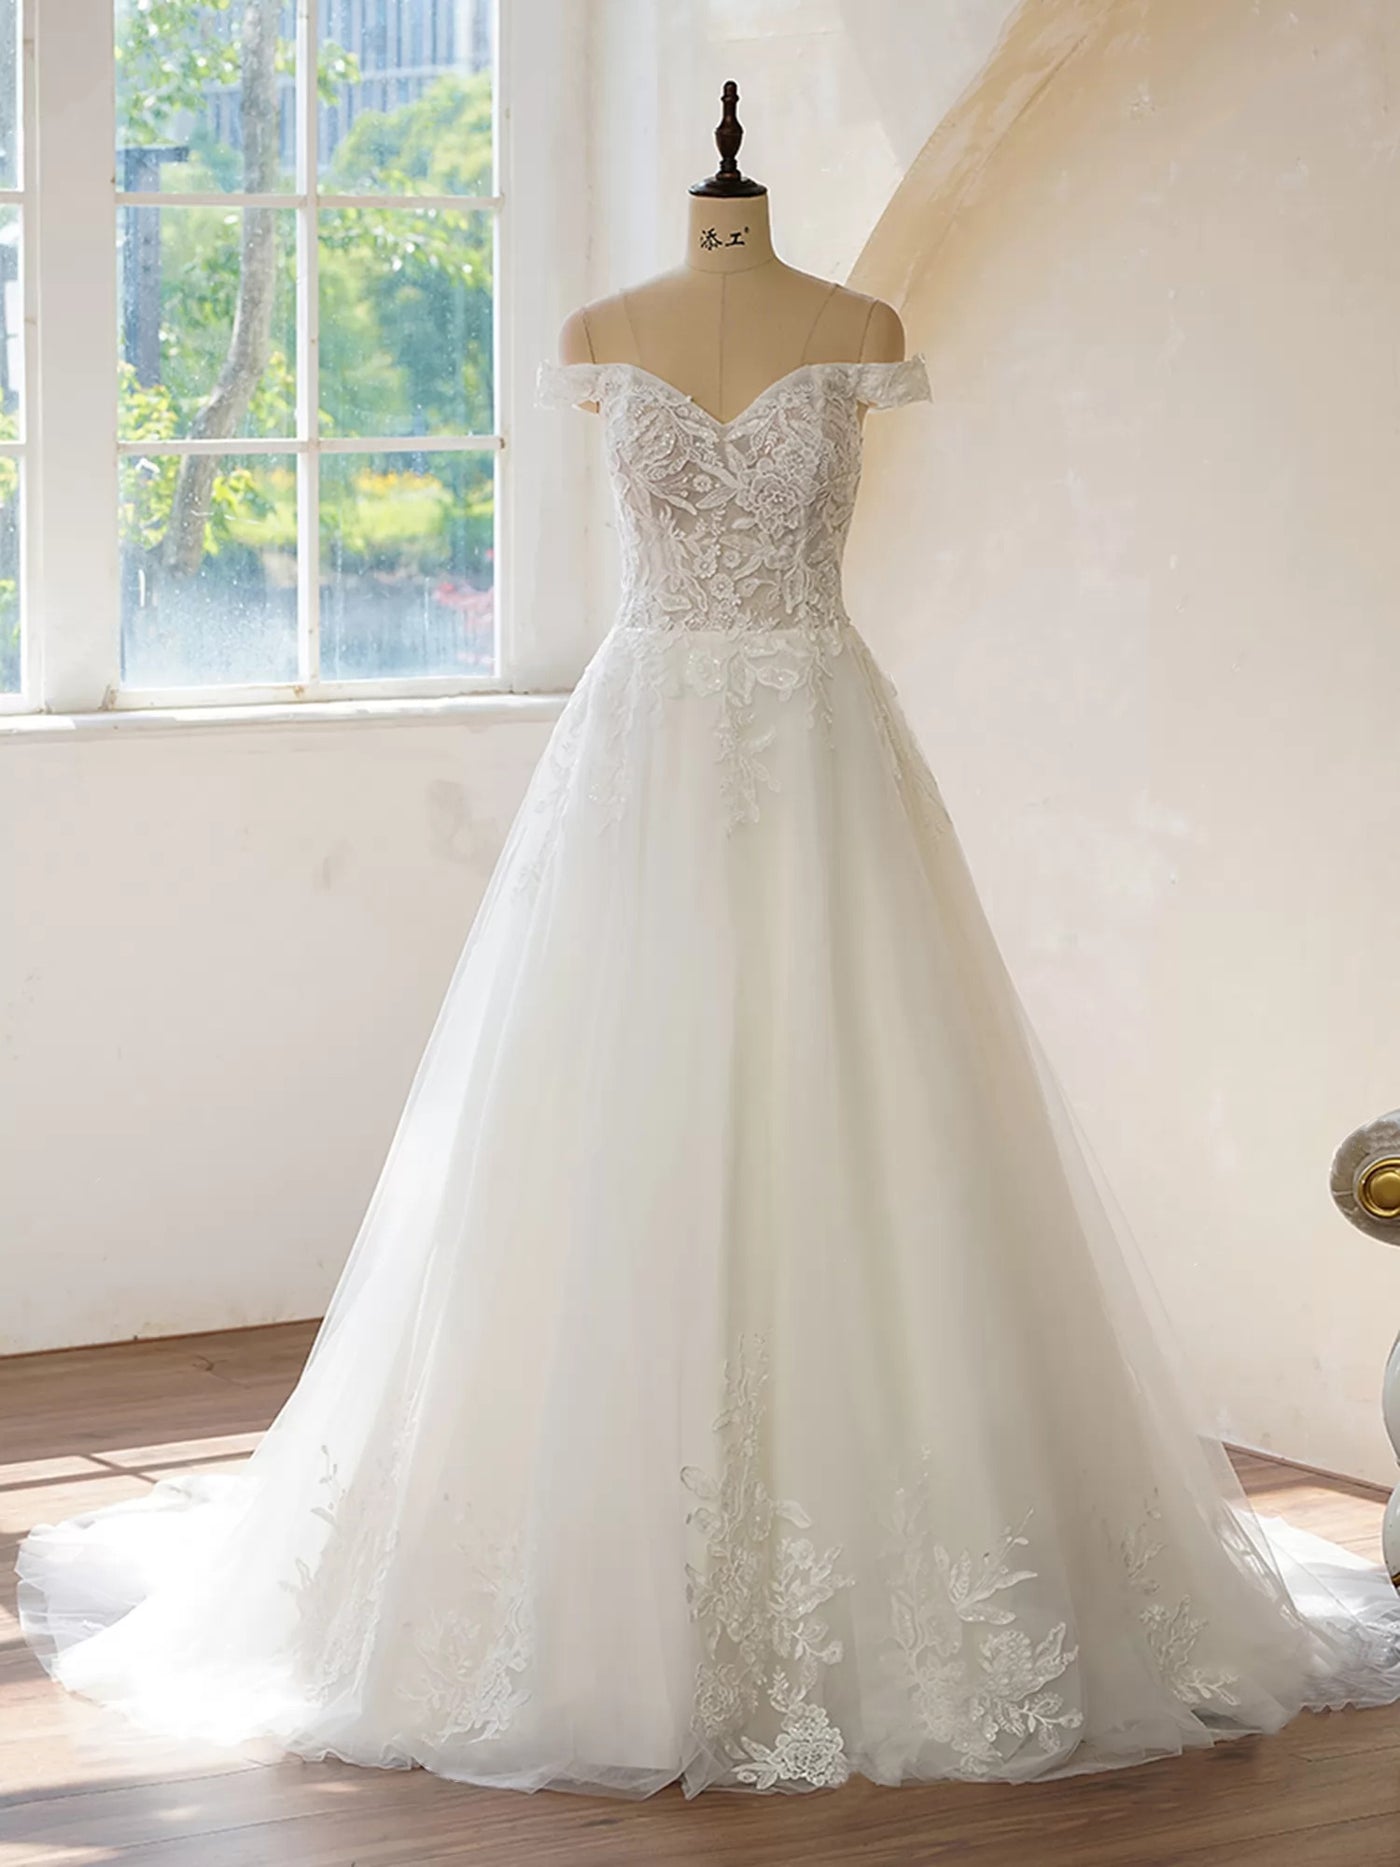 An Off the Shoulder Lace With Floral Wedding Dress by Bergamot Bridal in front of a window at a bridal shop.